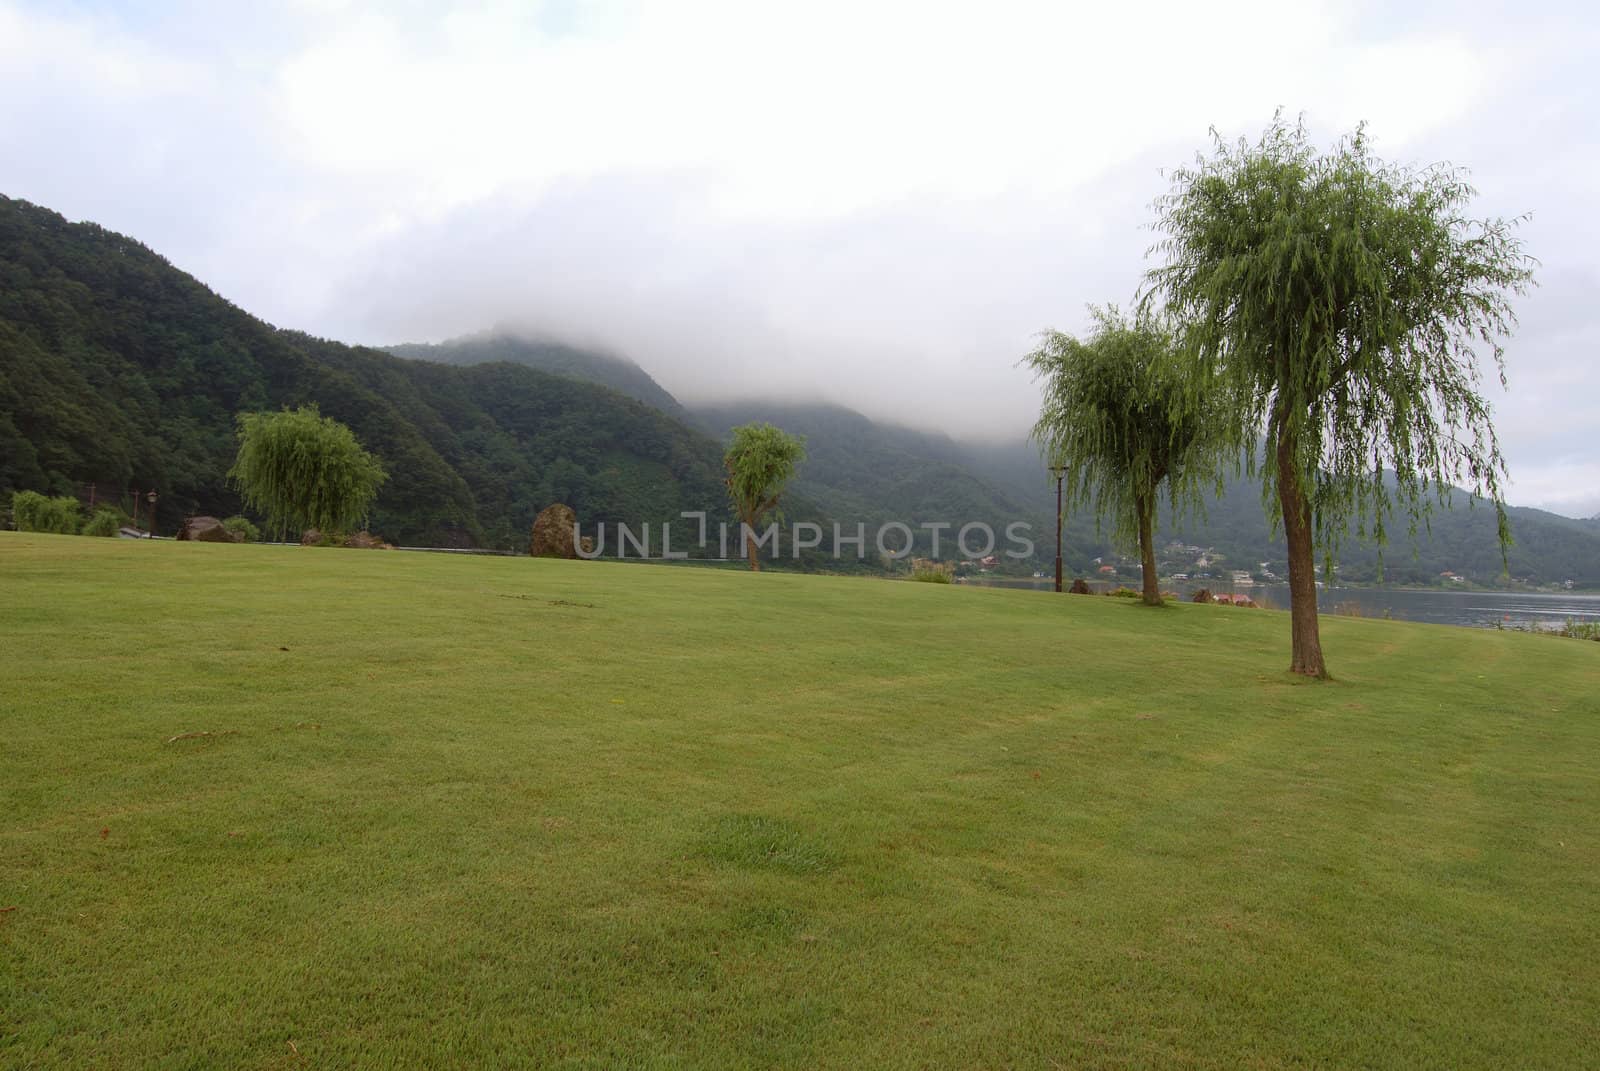 fresh summer landscape with willow trees and green grass lawn, Lake Kawaguchi, Japan